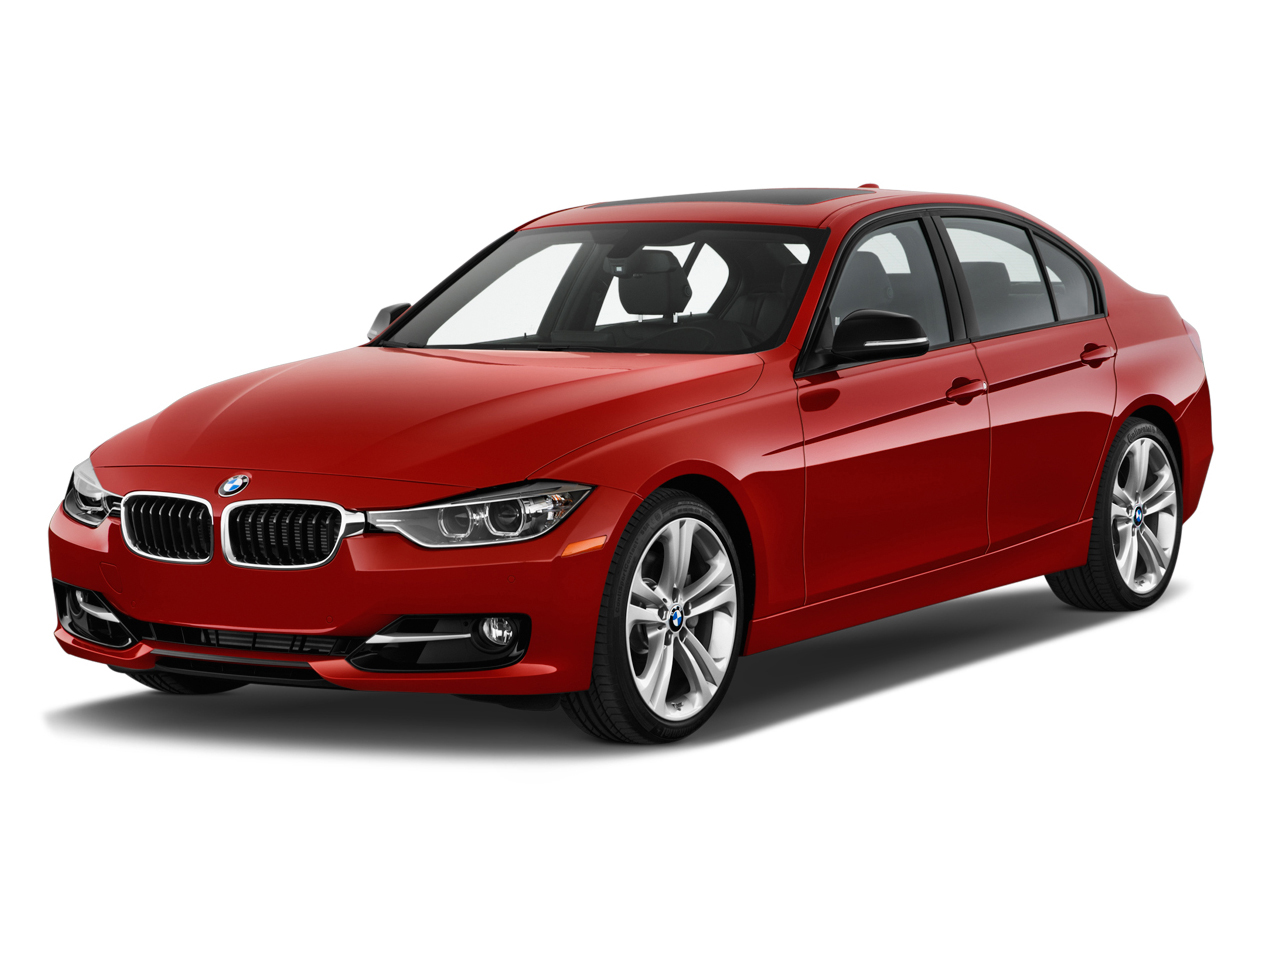 2013 BMW 3-Series Review and News - MotorAuthority